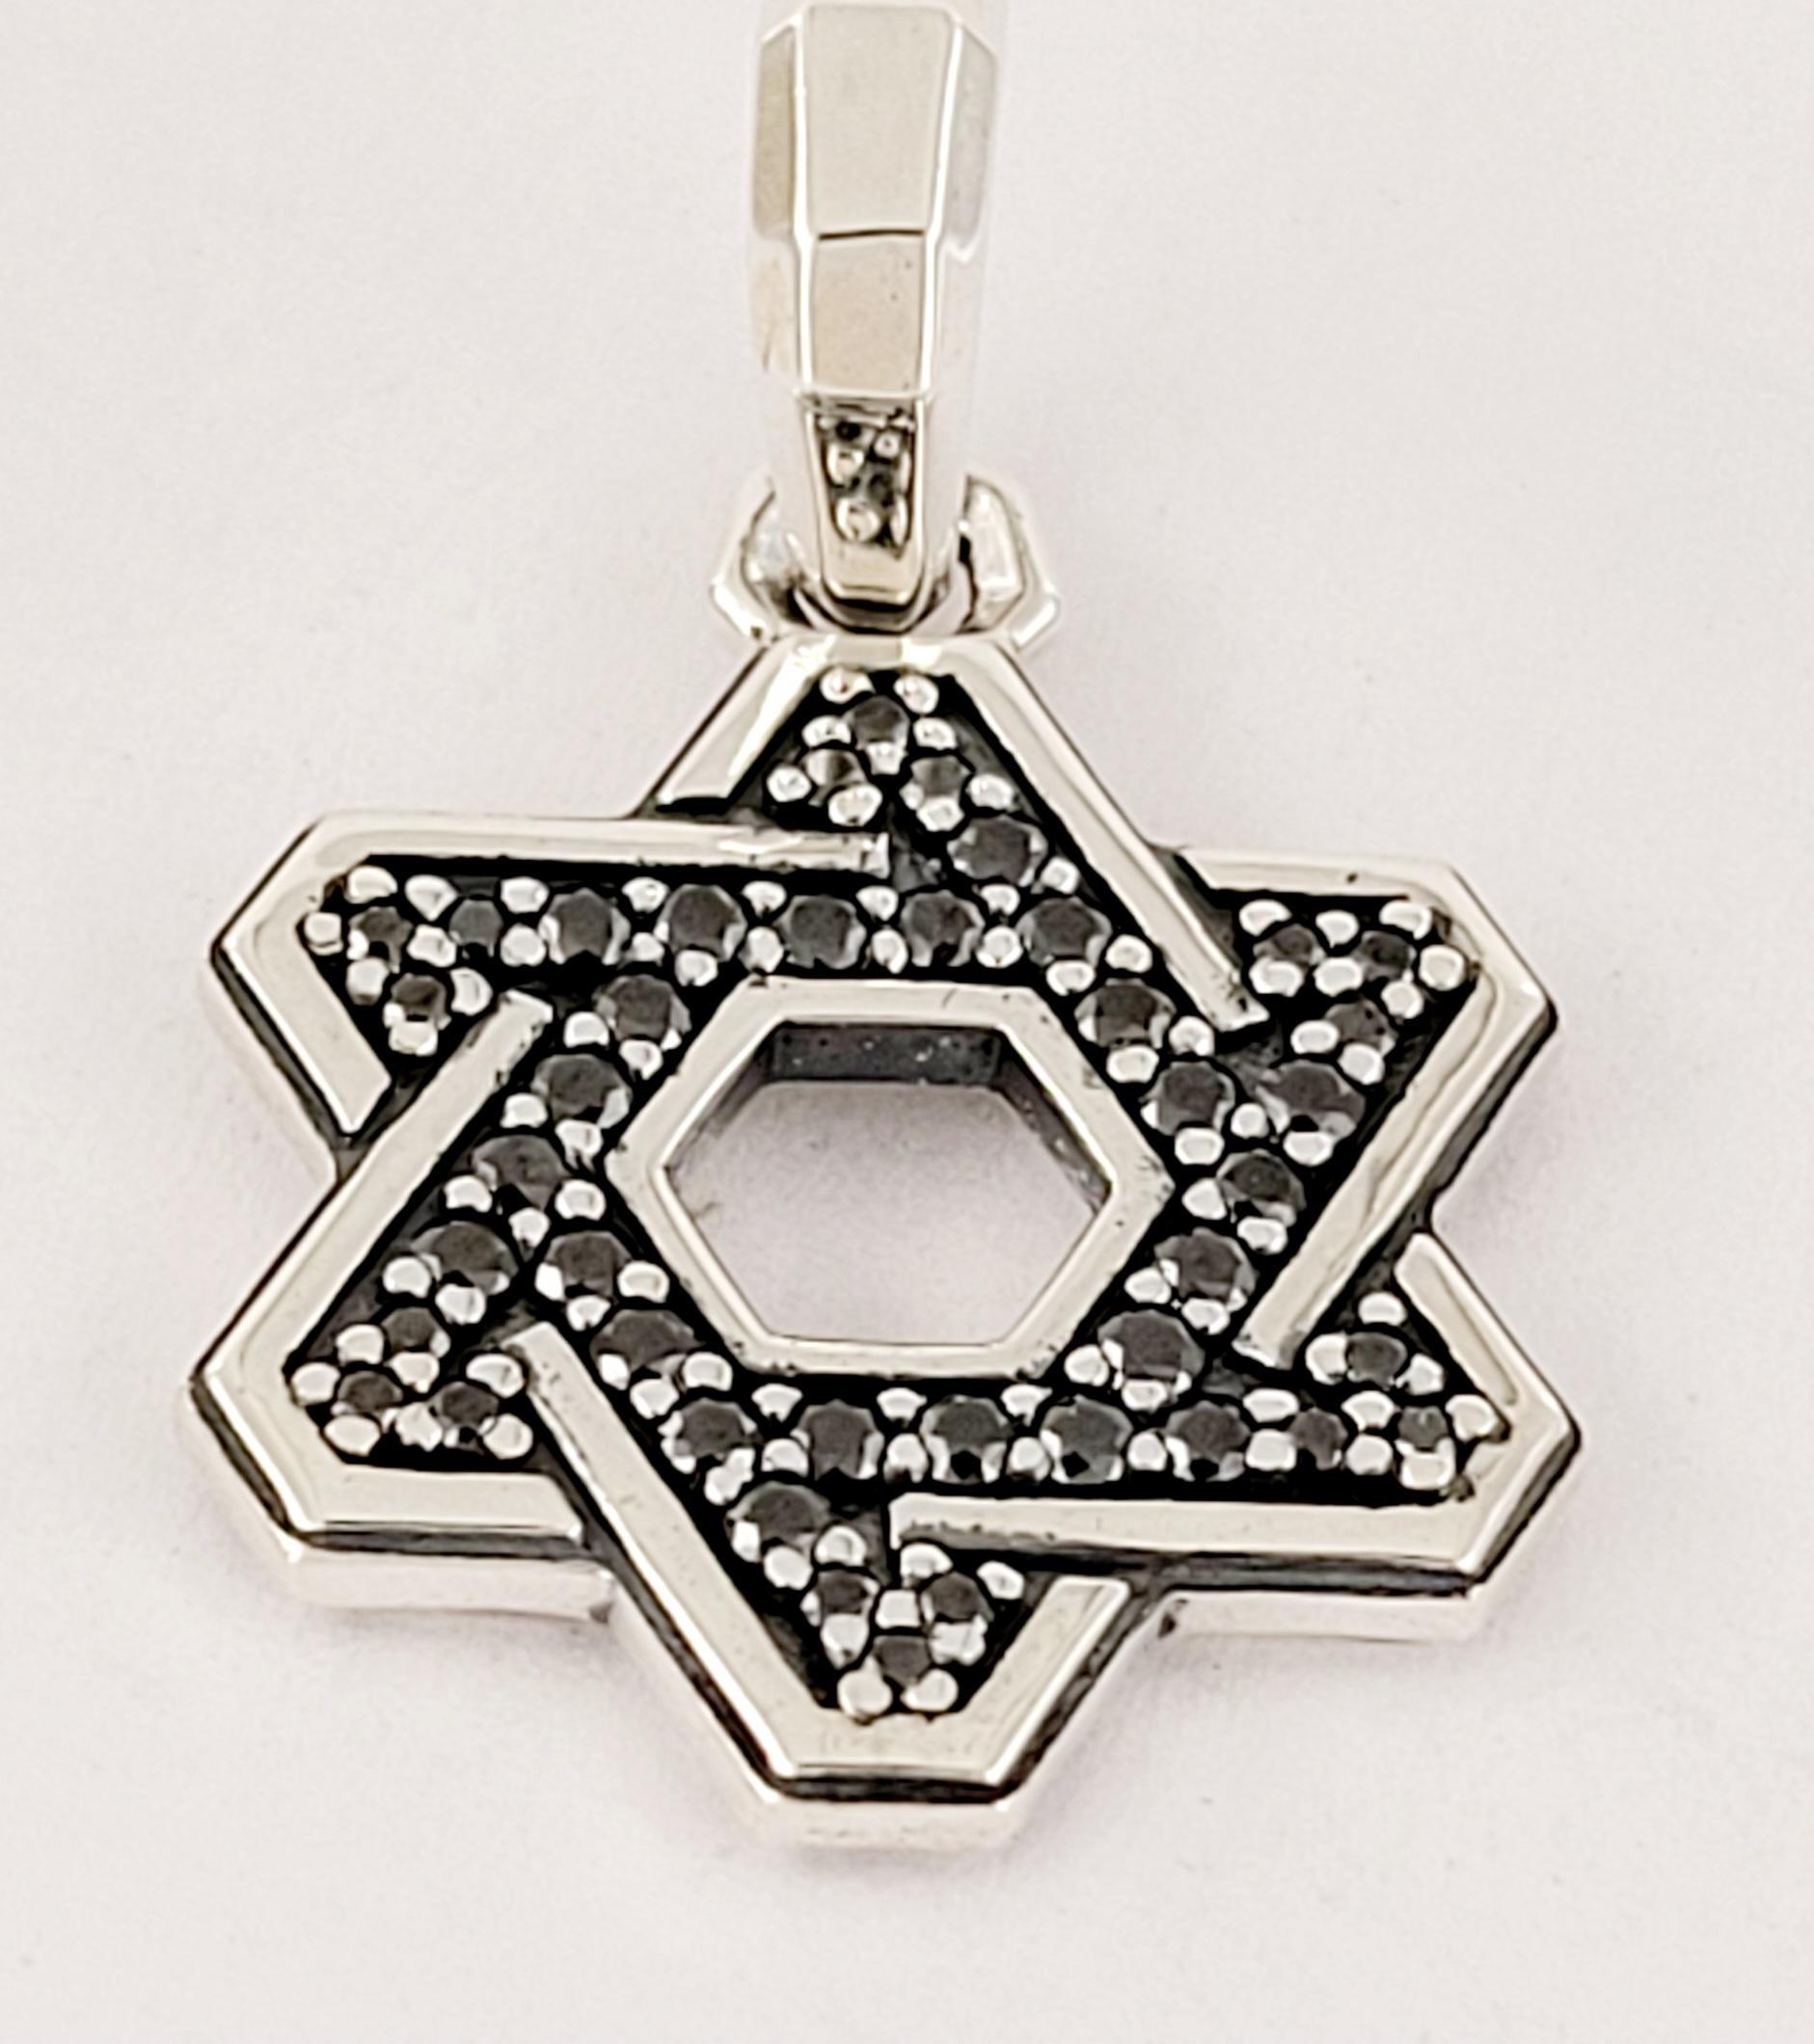 David yurman
Deco Star of David Pendant
Deco collection for Men
Pave-Set Black Diamonds, 0.36 total carat weight 
Material Sterling Silver 
Metal Purity 925
Pendant Dimension 19.8 X 19.8mm 
Pendant Weight 5.4gr
condition New, never worn 
Comes with